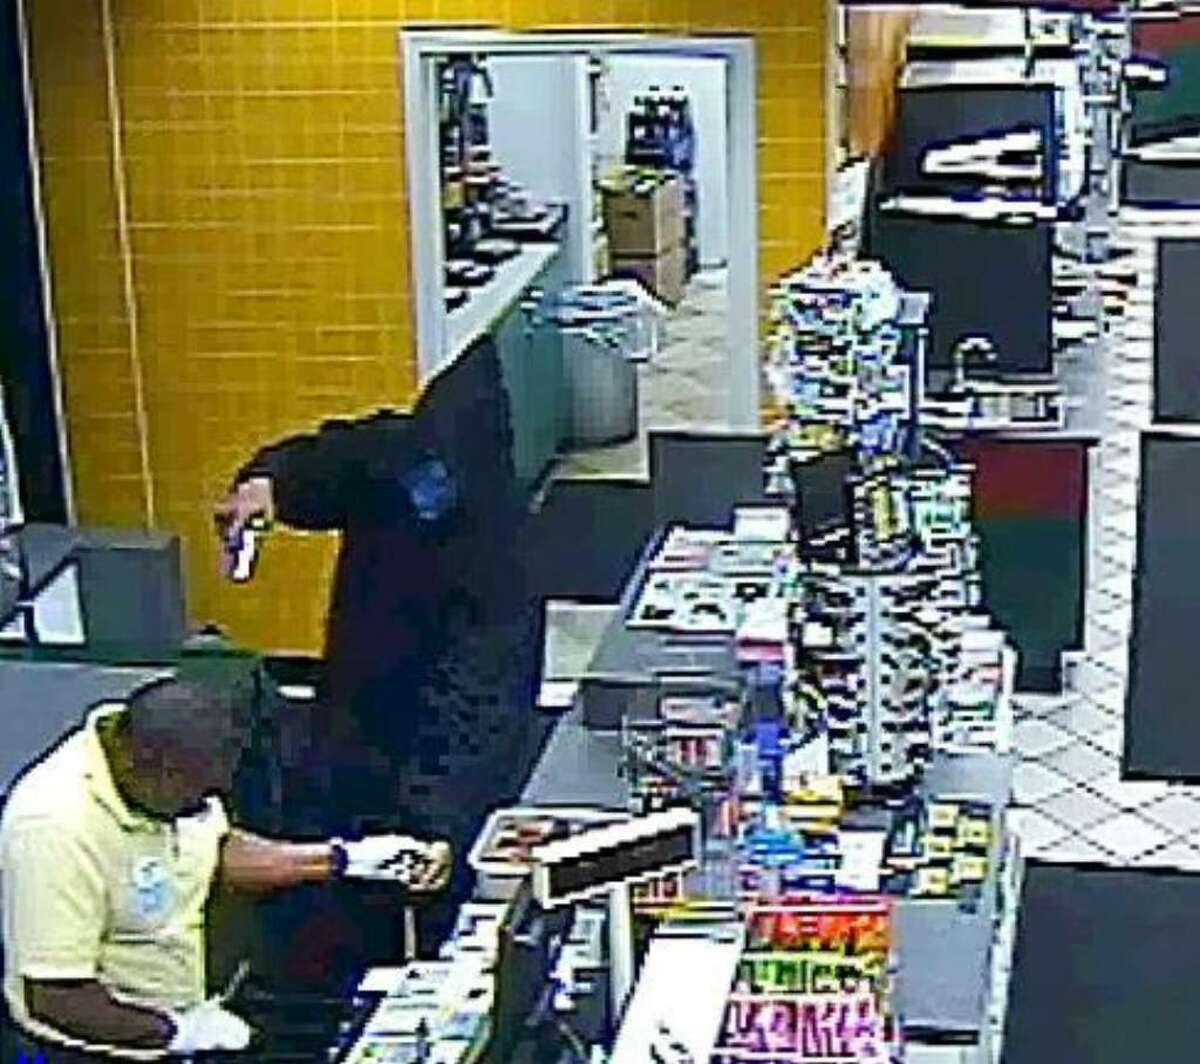 A still frame from the video which was released by the Greenwich police dept., shows the Nov. 21st, 2009 armed robbery and shooting at the Mobil on the Run gas station on East Putnam Avenue in Old Greenwich in which the hooded suspect with the gun wounded the store employee shown at left.